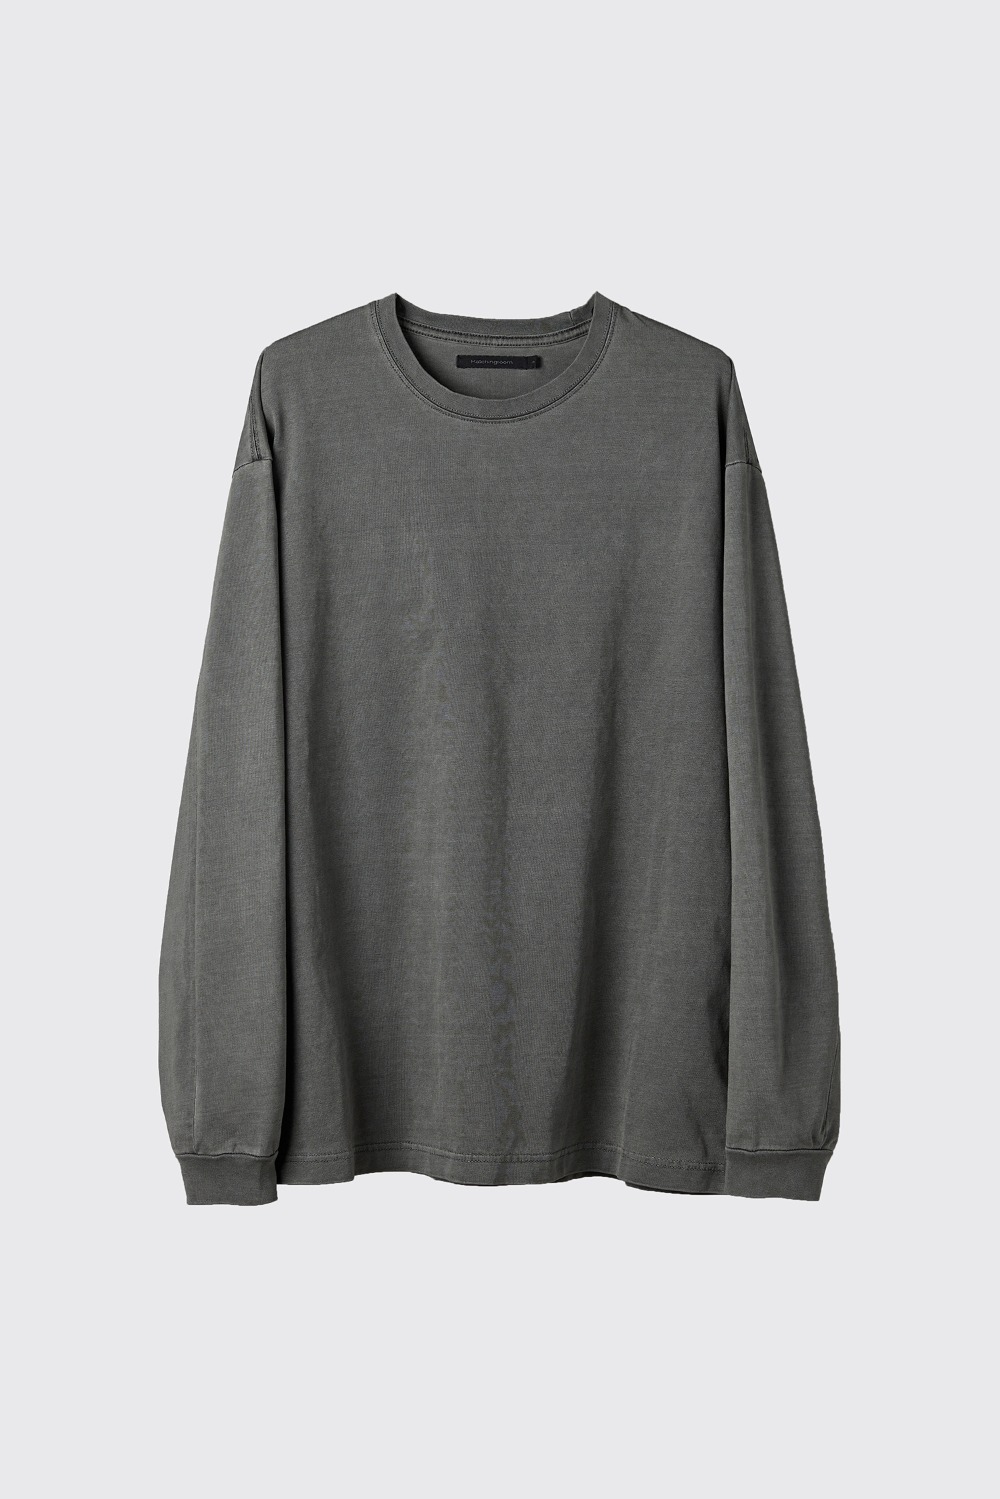 Layering T-shirt Dyed Charcoal